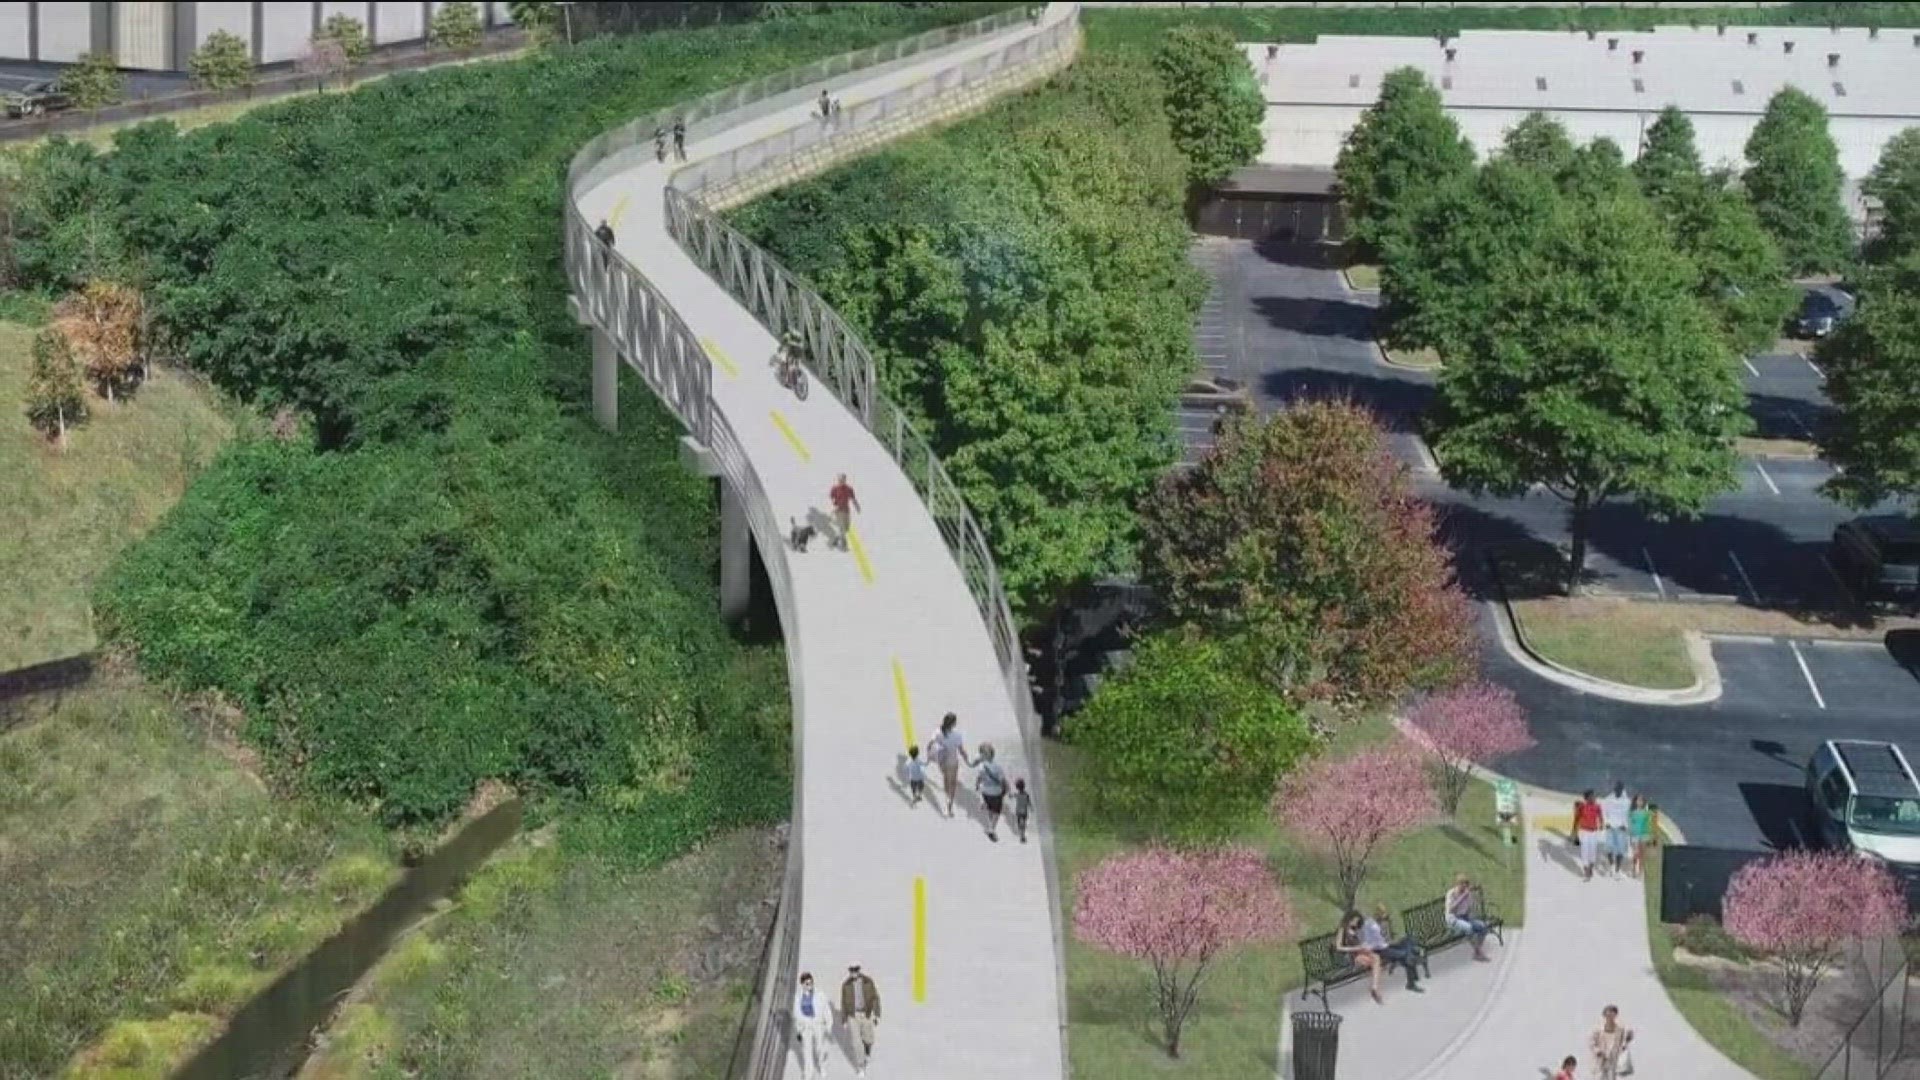 The Westside Paper Spur Trail will connect West Marietta Street to the Beltline Connector